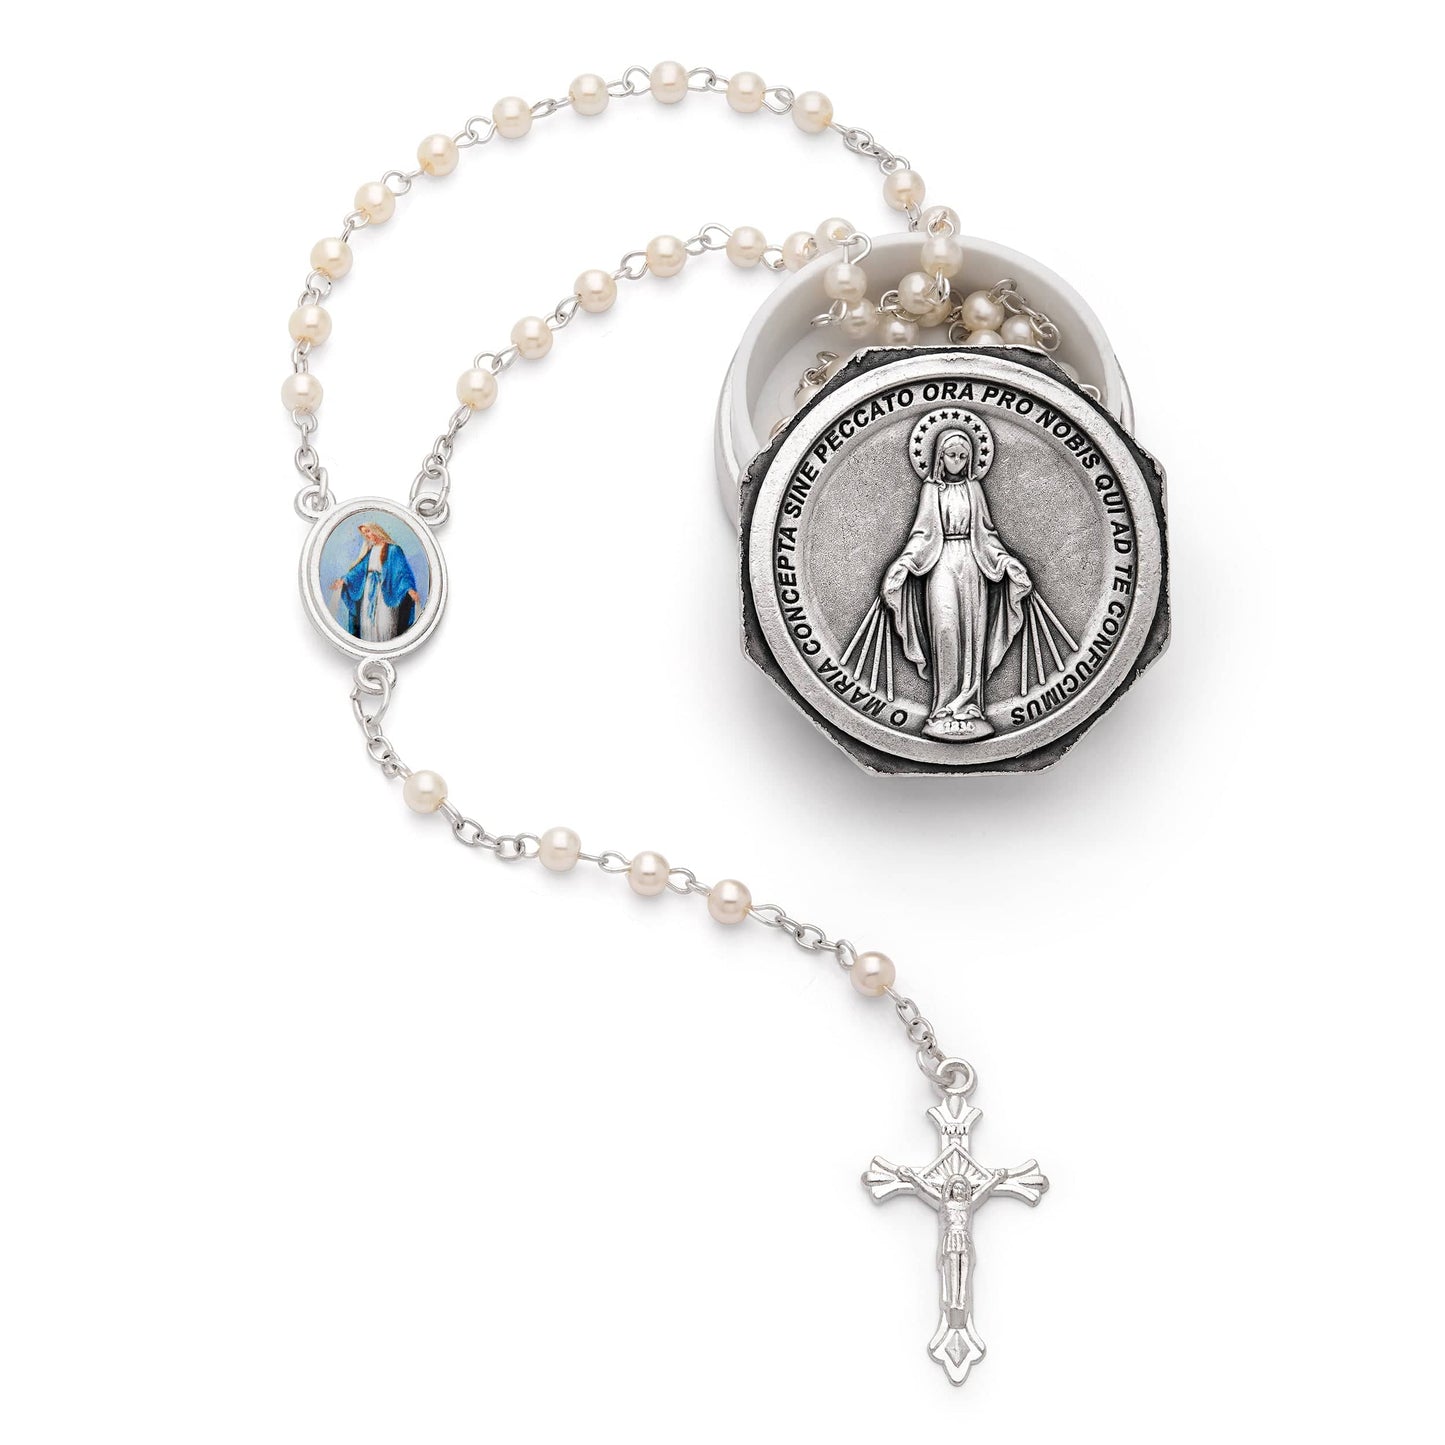 MONDO CATTOLICO Prayer Beads 40 cm (15.78 in) / 3 mm (0.11 in) Case and Rosary with the Miraculous Virgin